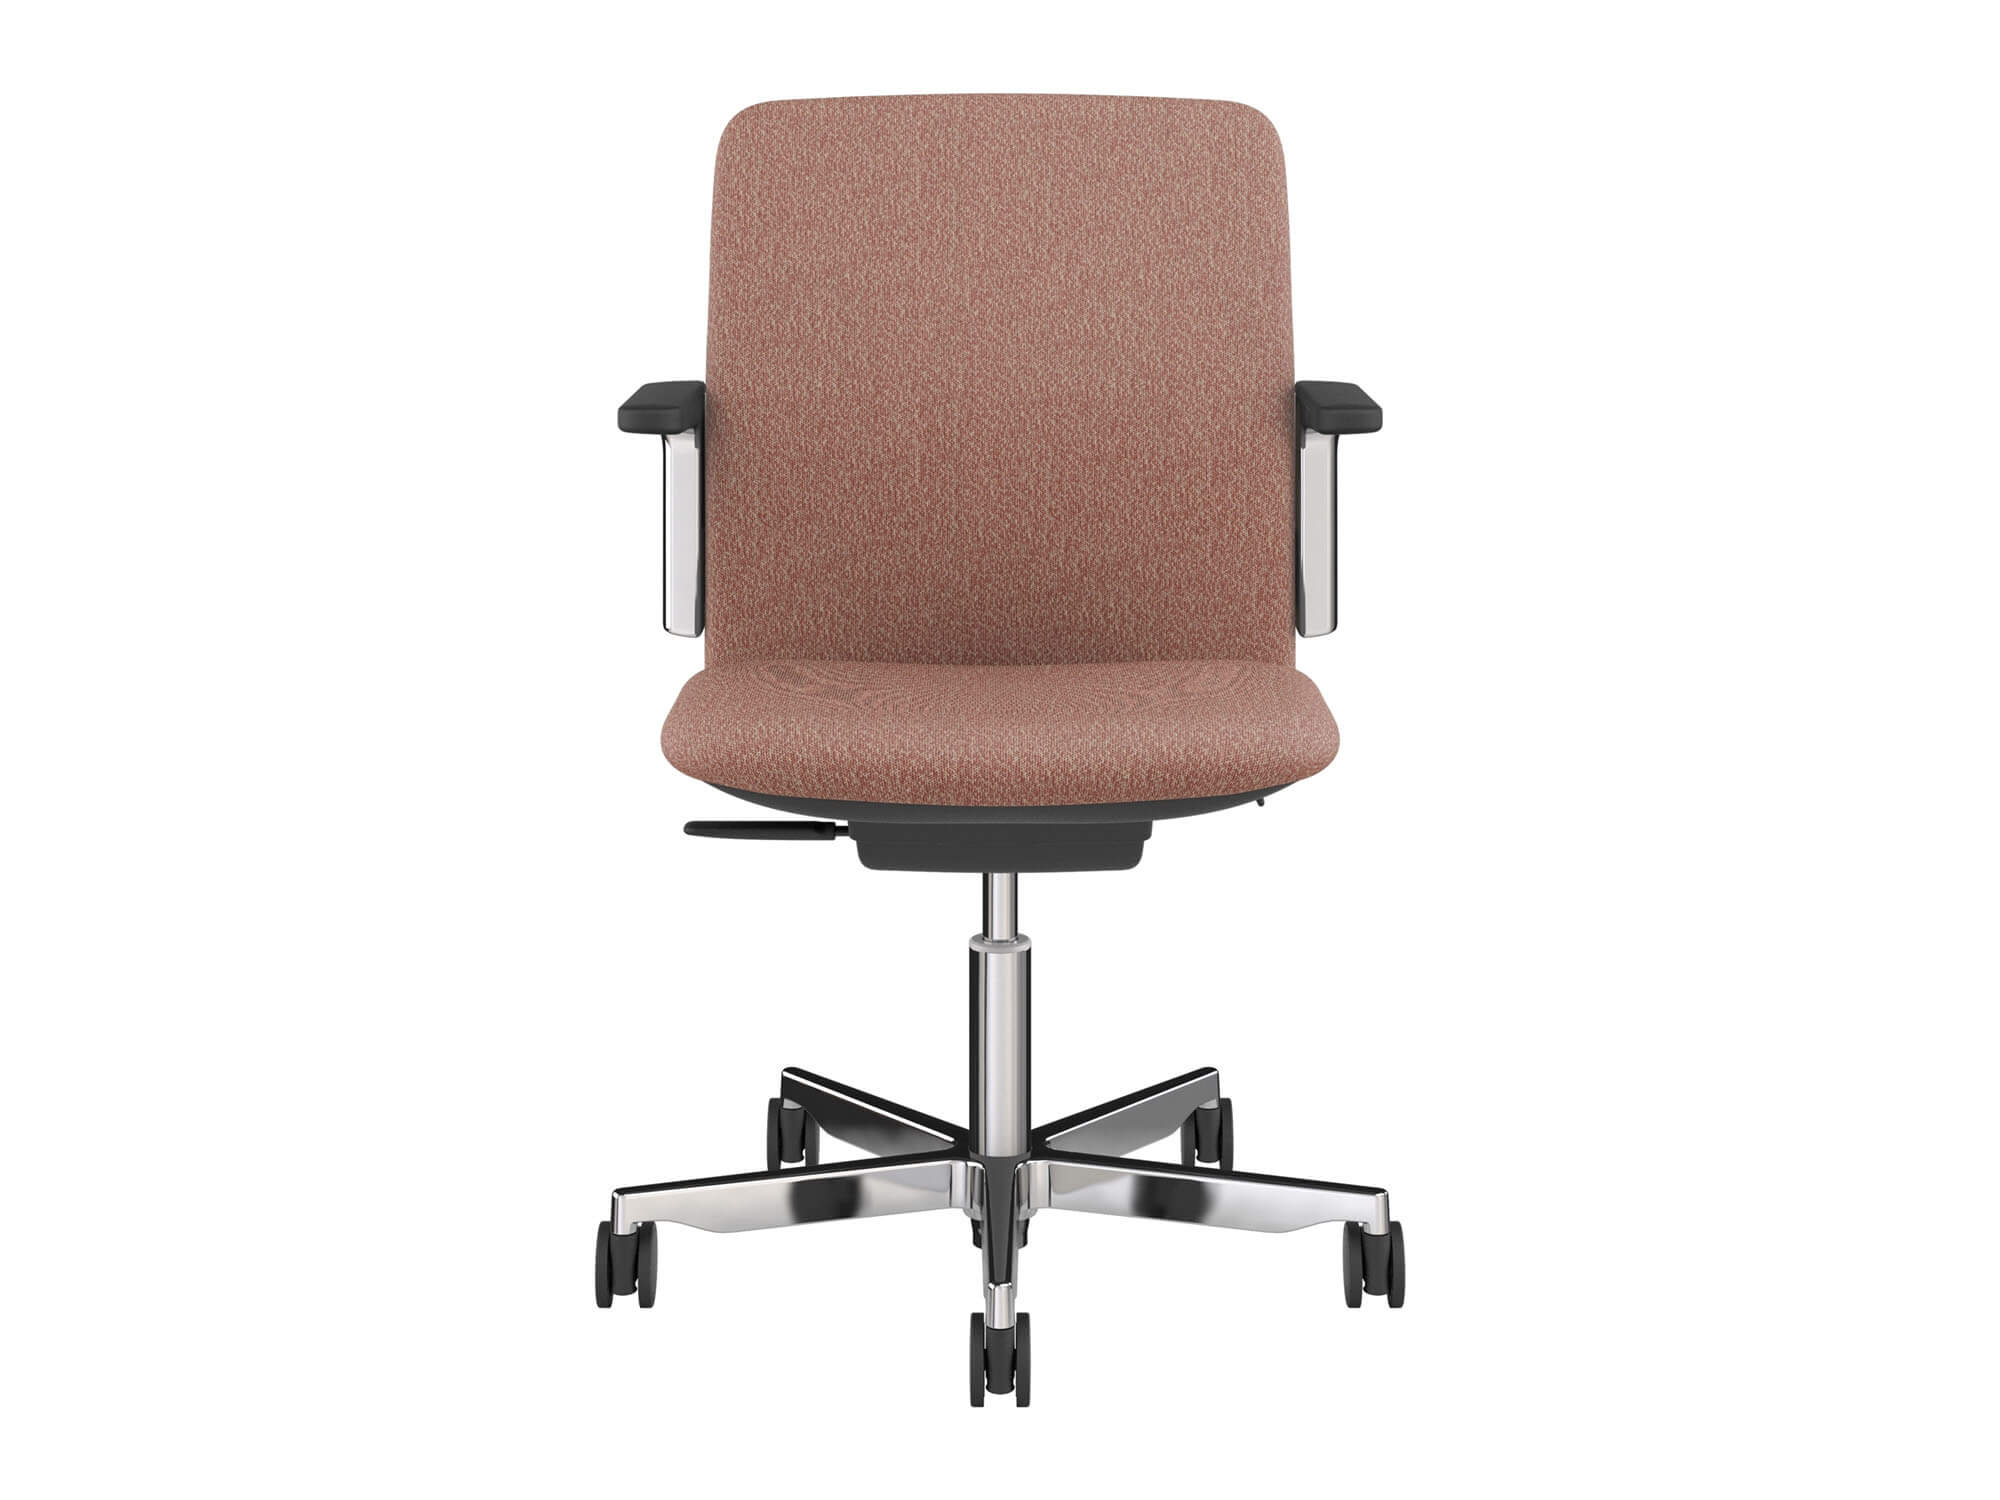 Ergonomic Comfort and Sustainability | Shop Humanscale Path Chair